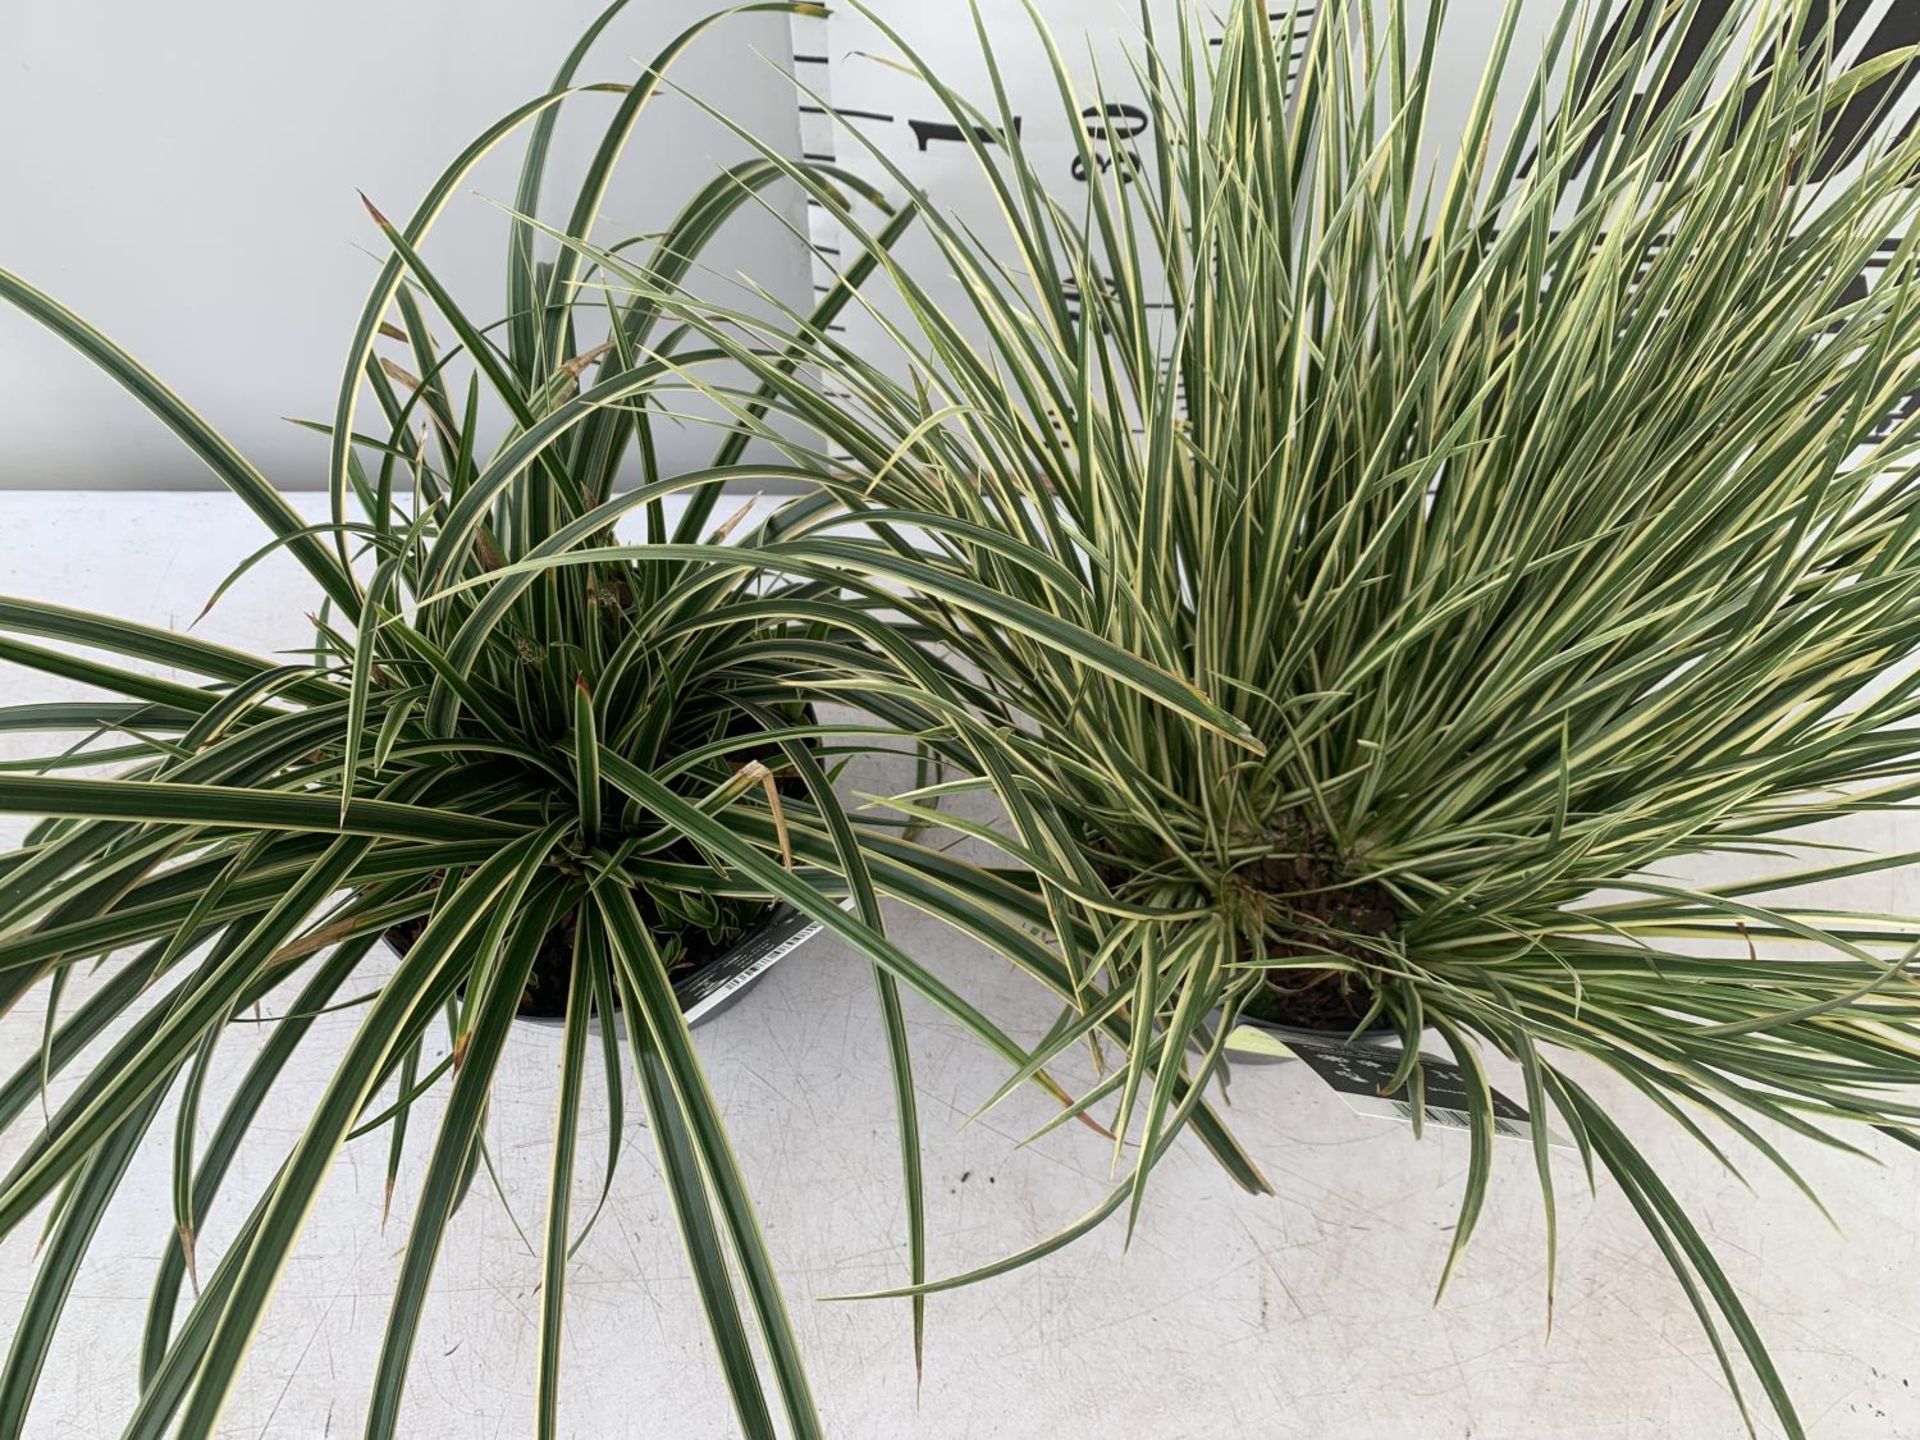 TWO HARDY ORNAMENTAL GRASSES ACORUS GARAMINEUS AND CAREX MORROWII 'ICE DANCE' IN 3 LTR POTS APPROX - Image 2 of 7